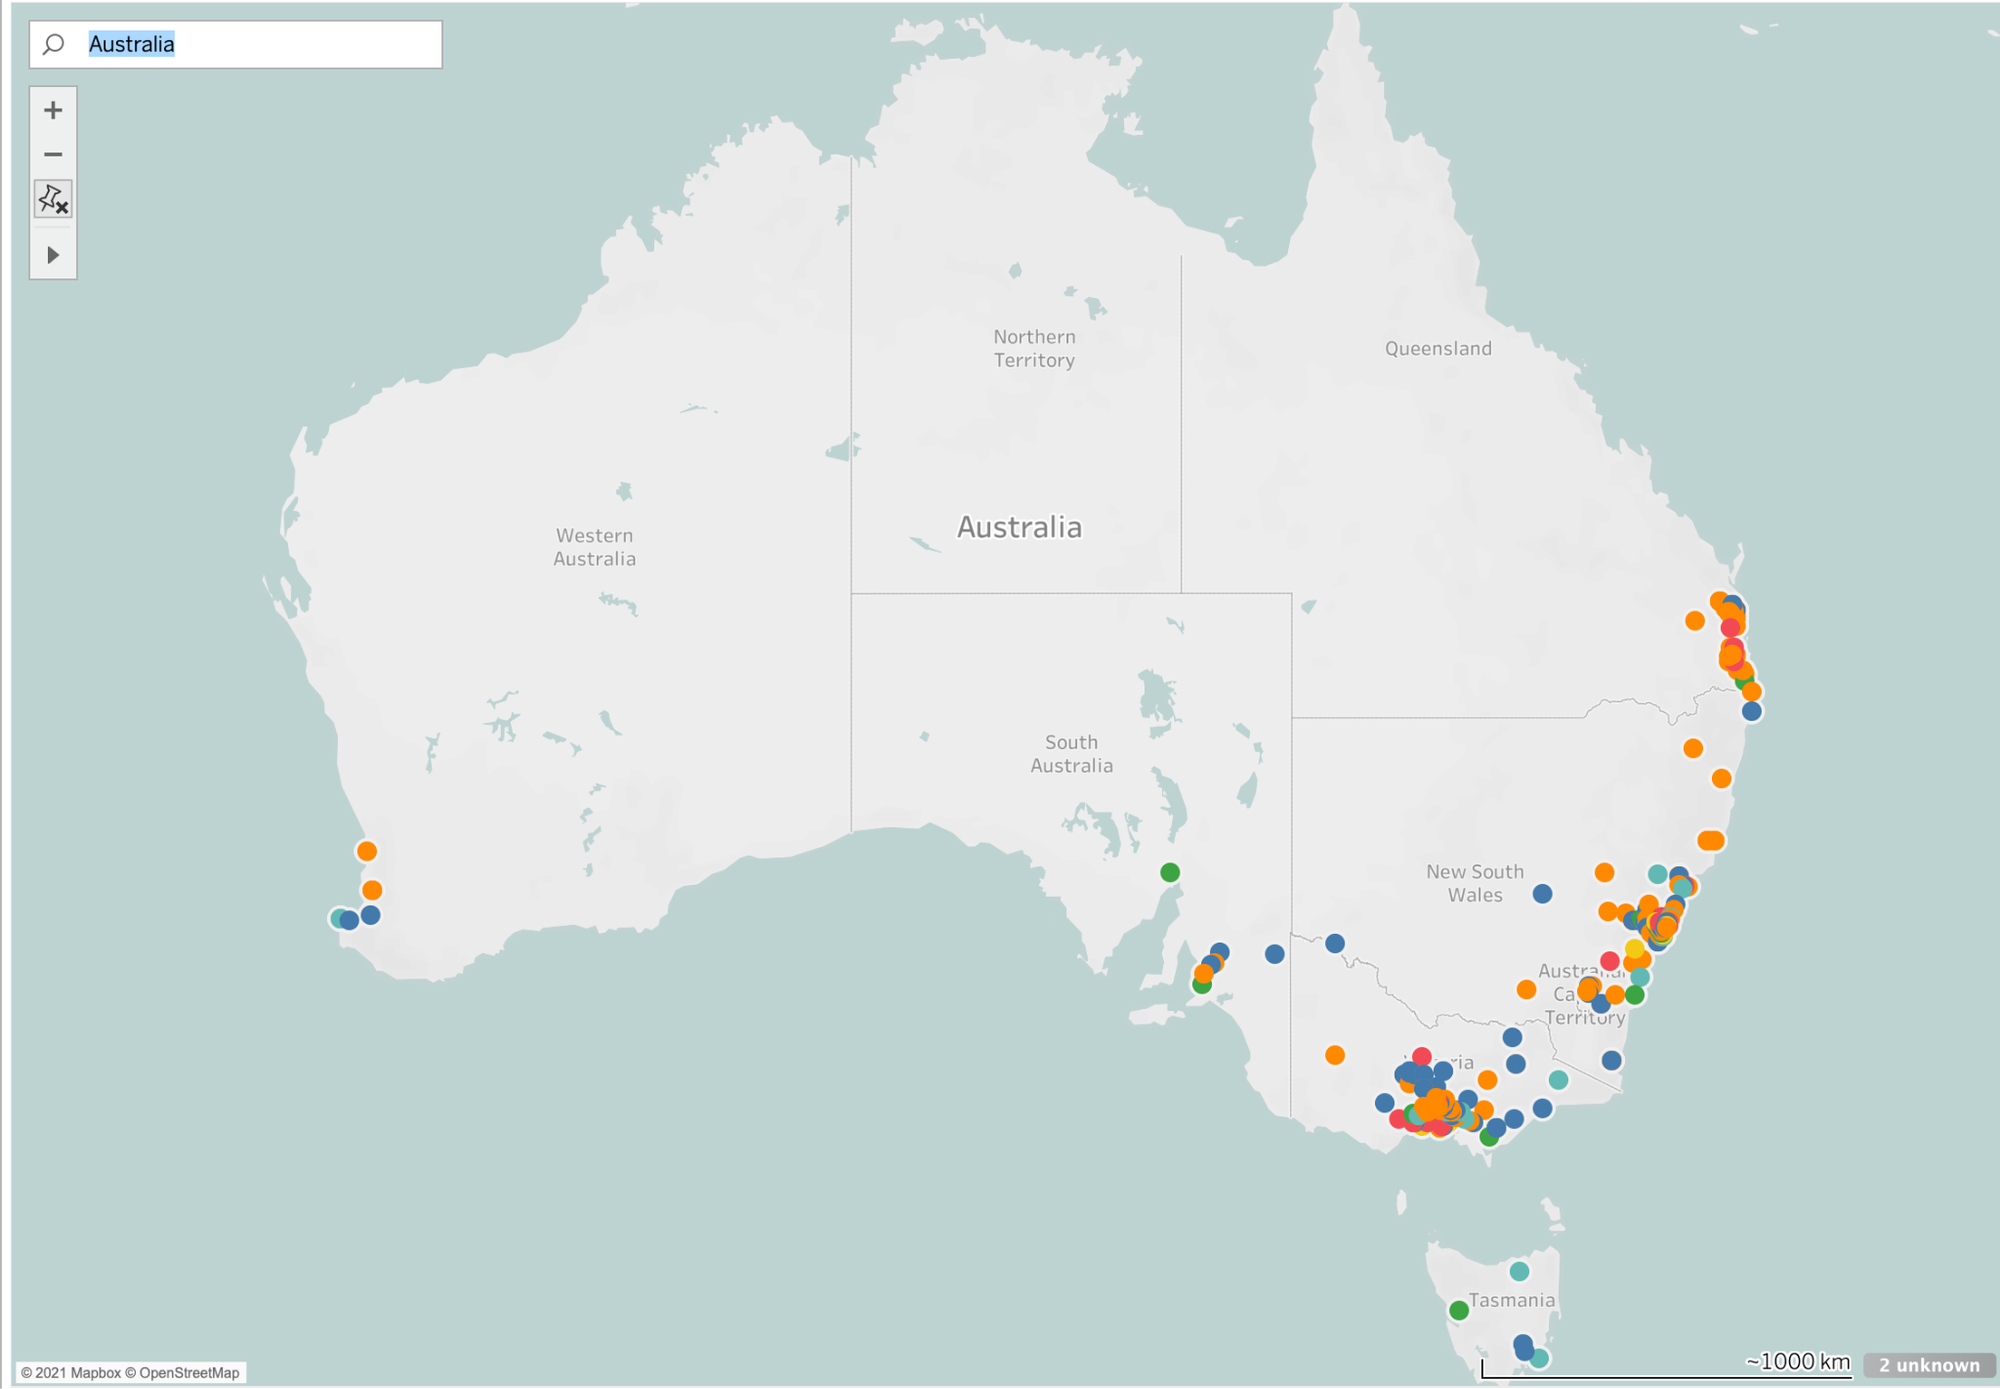 A detailed map of Bushfire Archetypes across Australia according to our tool.